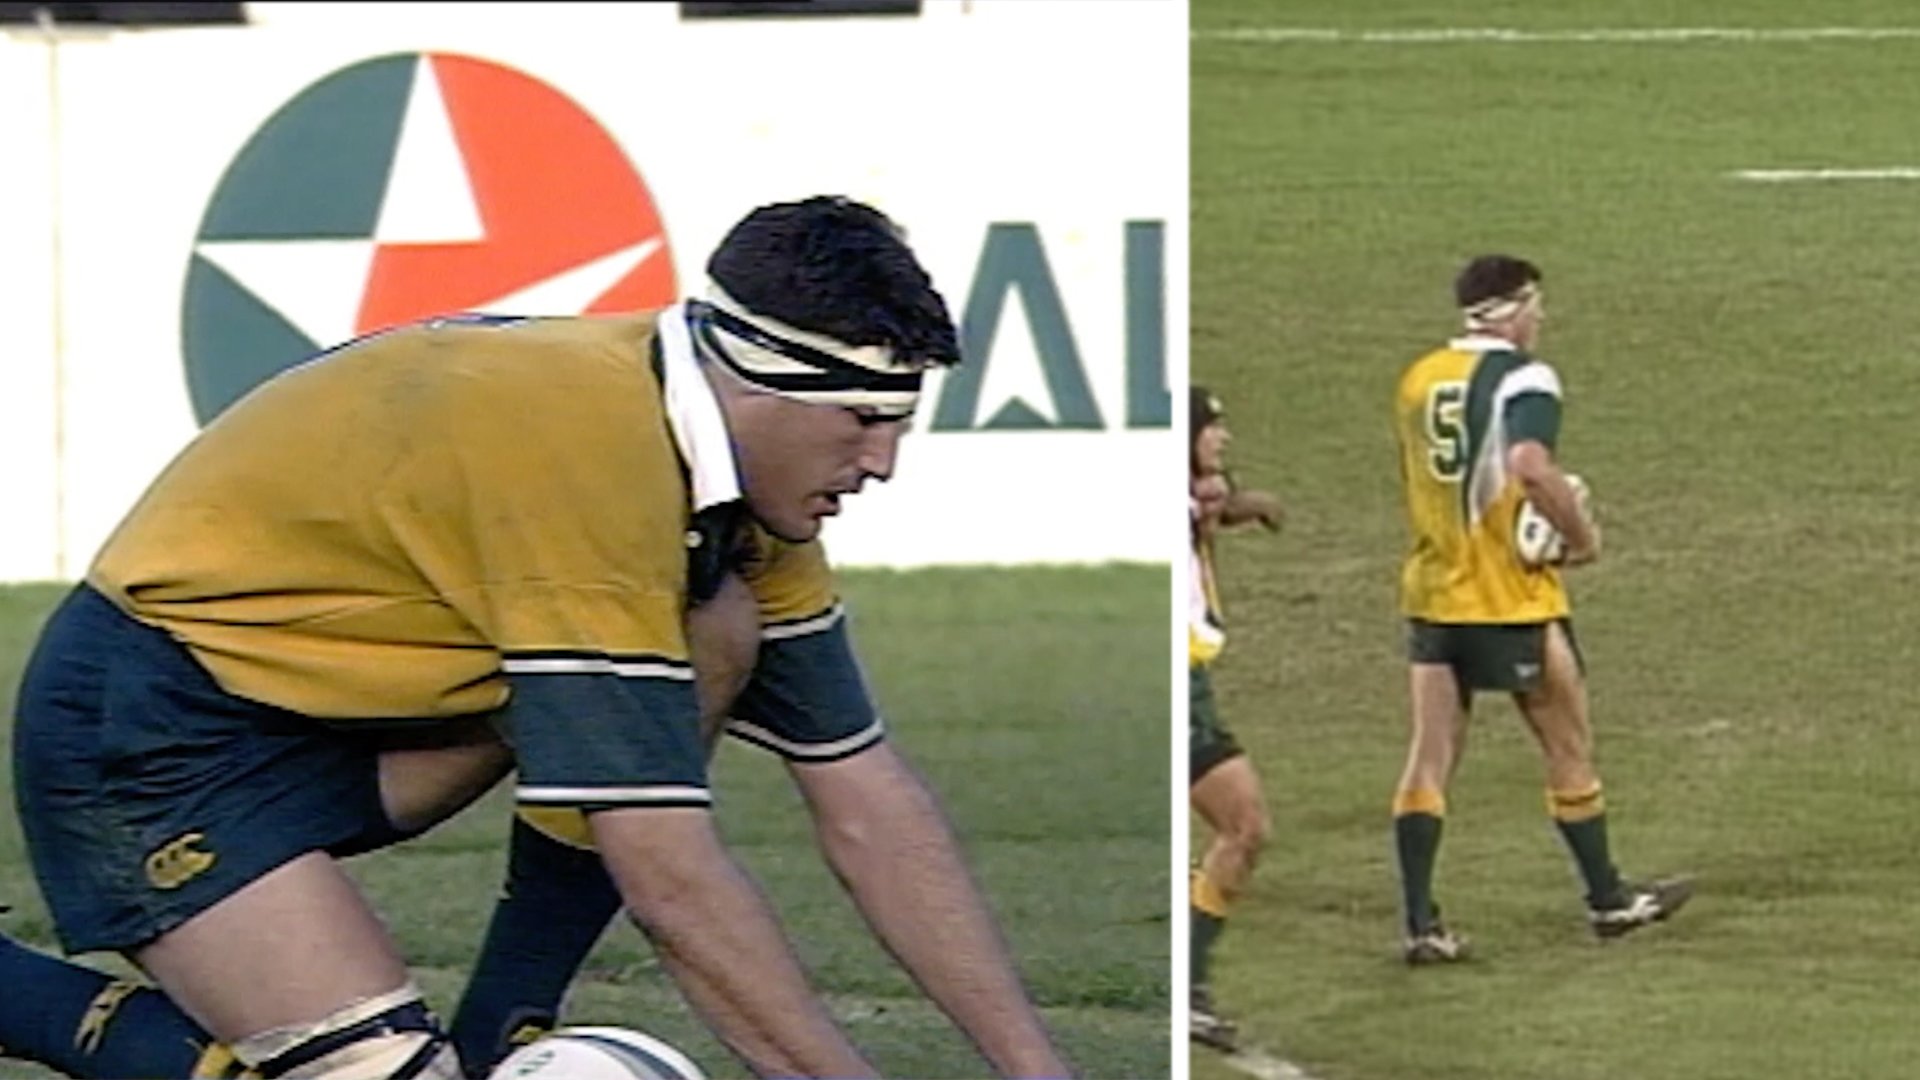 The time a forward was trusted to kick a match-winning penalty in a rugby match